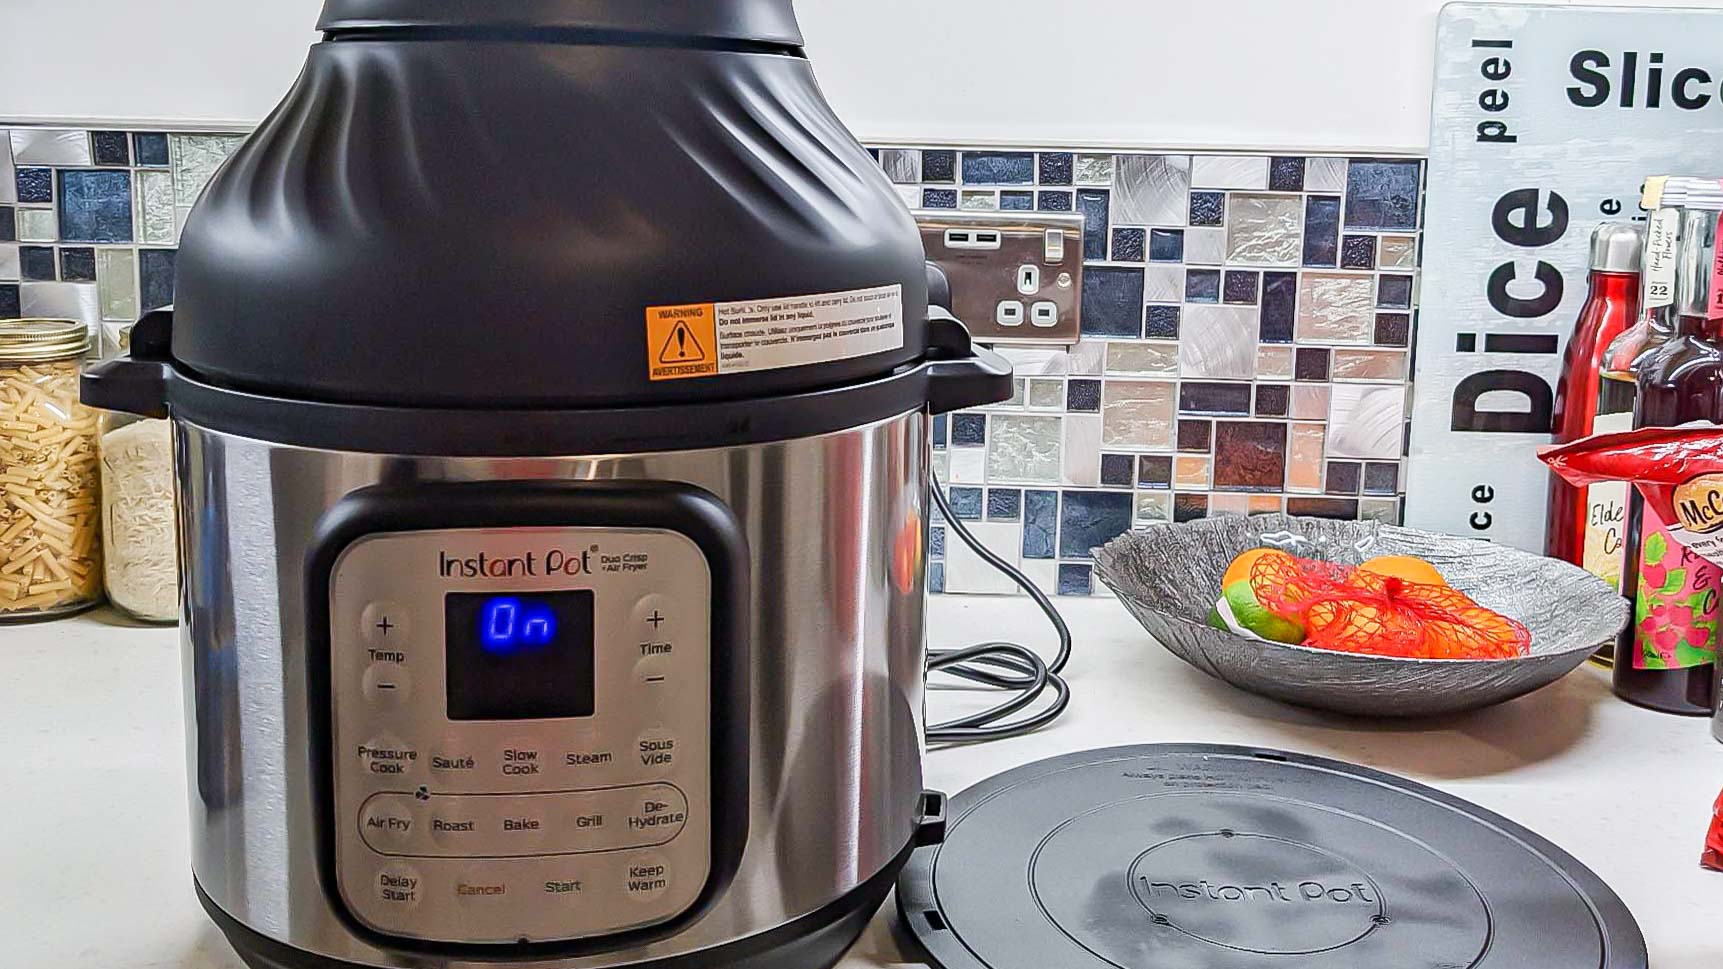 Instant Pot Duo Crisp and Air Fryer on kitchen counter